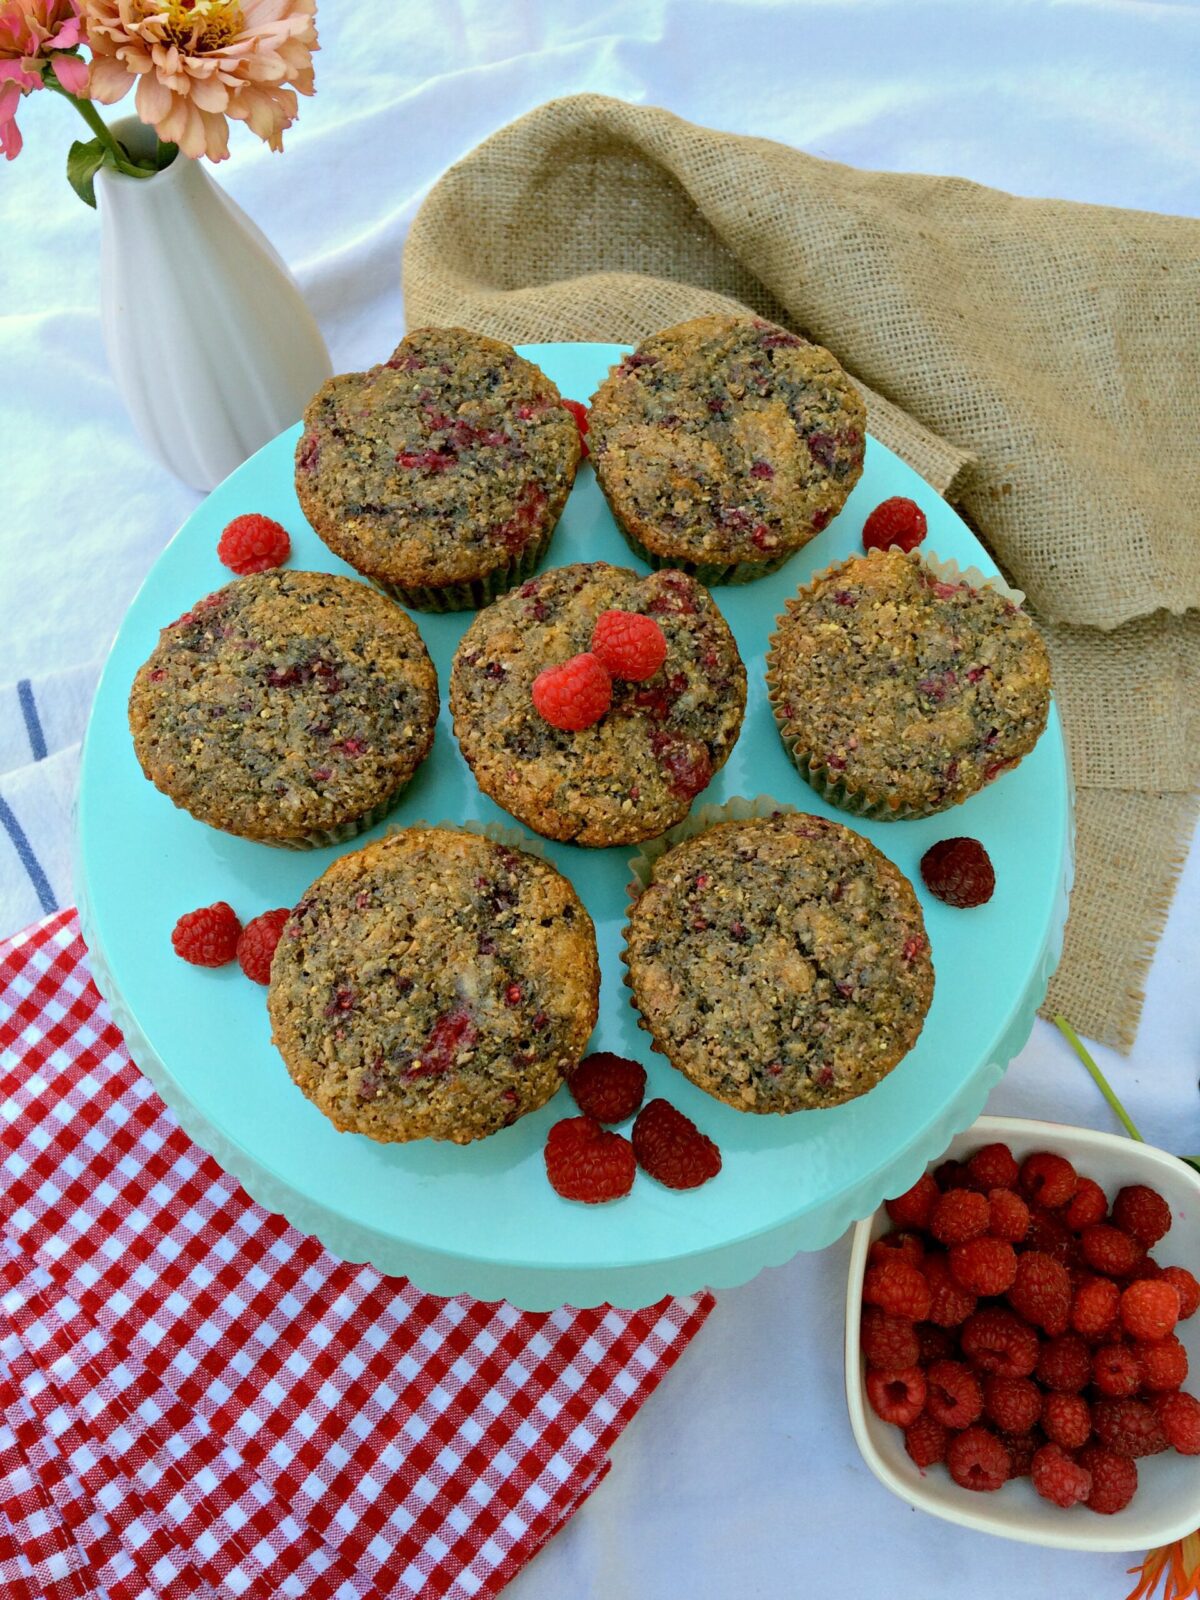 Every year I can't wait until Tim Hortons serves Raspberry Bran Muffins. They're my favourite! I developed this easy copycat recipe to fill the craving. Healthy, delicious, and perfect for snacks and back to school lunches.